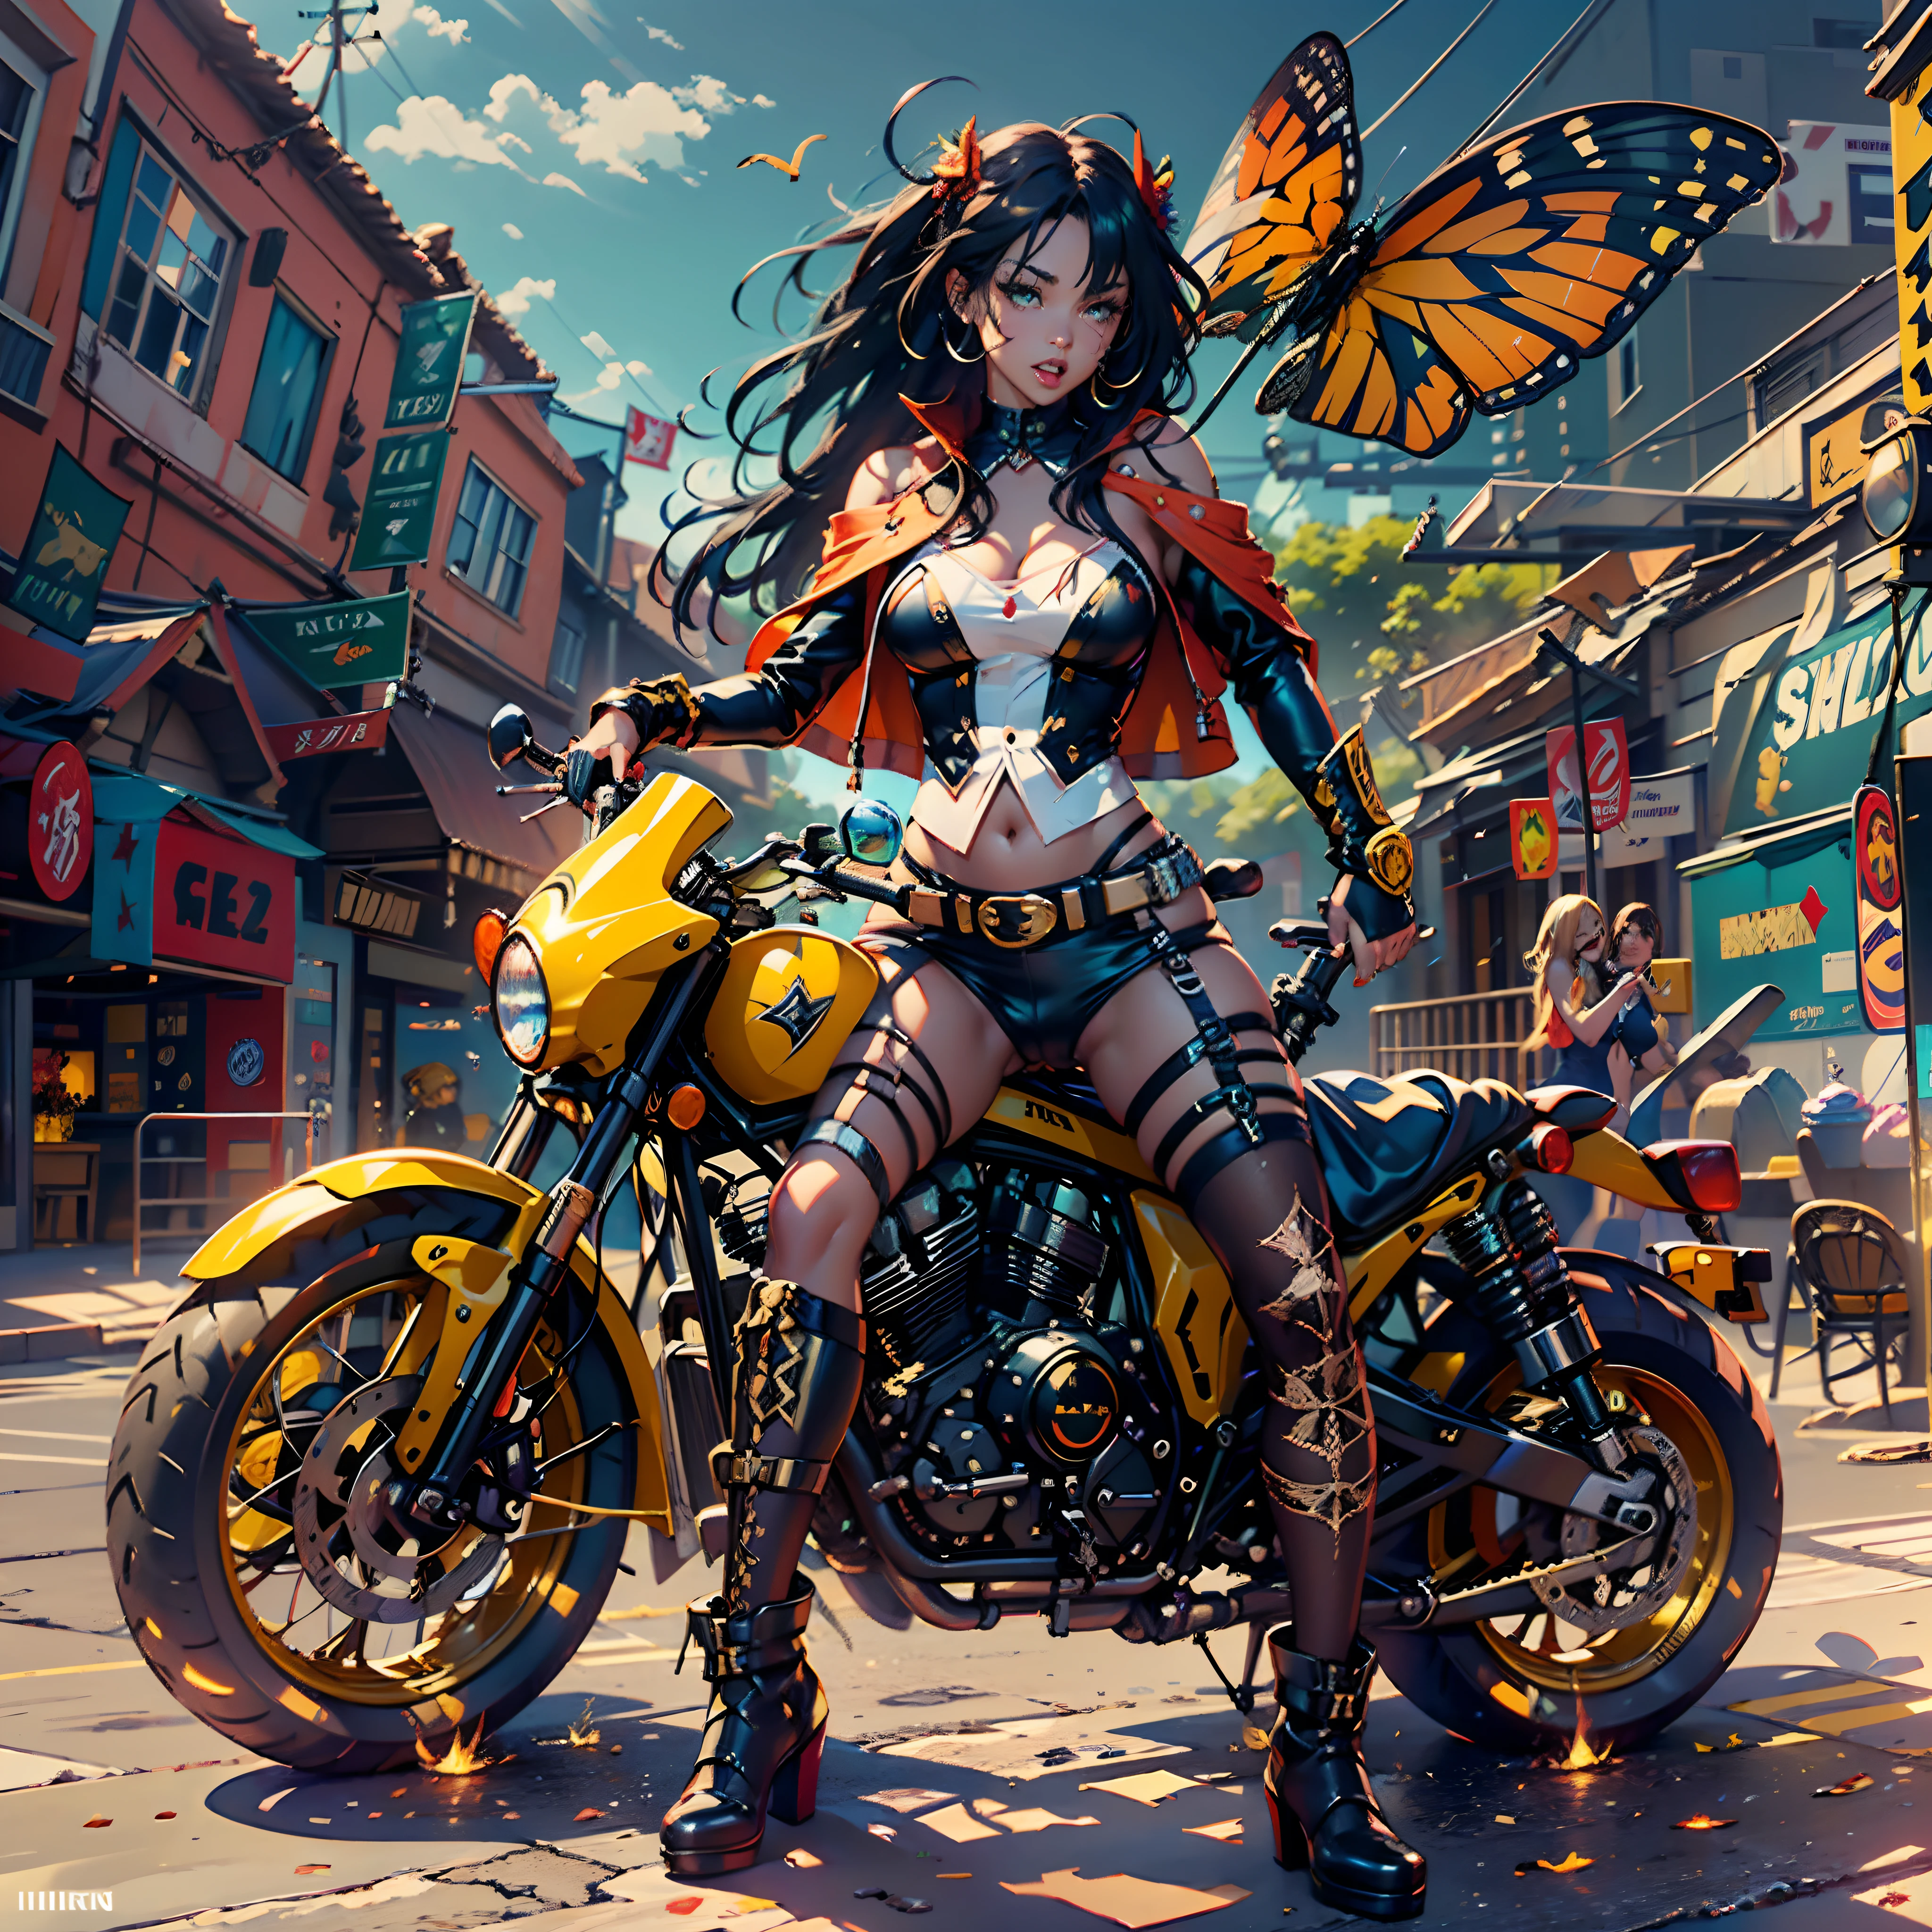 Sun epic Masterpiece Ocean Sea sunlight backlight Goddess Beach deep path beholder outdoor mounted motorcycle_Harley_Davidson Suncraft Artificier hearth sundrop urban Equirectangular_360 "Armada" contre-jours moto "Heavy Metal" Devastating Will-o'-the-wisp iota pixie sprite luminescence war battle mature female "luis Royo" dazzling ride bike, Cosplay riders richesse Amiral decorated "Nicki Minaj" Commander jukebox Pilots jacket cow-boy flag Earth sunLight ultra pro-Photorealistic optimal ultra_high_quality opengl-shaders ultra_high_detail accurate reflex ultra_high-resolution perfection graduates volumetric lightning improved Octane_rendues UHD XT3 K 32K 16K 8K DSLR HDR UnrealEngine5 3dcg shadow Diva analogiques hairstyle dreads bangs extatiques symmetrical athletic african body skin tanmed suave cheekbones effects embarrassed glushes eye-liner saphirs saturate gorgeous dark beautiful eyes black pupils brown iris lazulis turquoise open mouth teeth (tongue droplet water drop of water) obvious smiles choke Floating Jacket Eccentric Cape Levitating Shoulders-Off Shirt Lace Clavicles White Papillotes embroidered leathers breasts reveal sideboob satin livid yellow orange corsait thick felt skirts matching bristles ample swinging spinels navel waist belt-chastity revealing heart diamond padlock silver agate pubis scarlet pubis-hairy indigo bristles protrusions silk Snap-lock tin gold garters thighs legs stainless steel boots gothic onyx, rubis summon milkweed floraison invoque viceroy magic incandescente creature CGSCOSITY butterfly Cristallines Wings (EOS R6 135mm 1/1250s f/2.8 ISO400) Monarch, Canon-ion flash blow glow opale impact, straight outfits armor heavy chrome flat rune lava bands population Tourmaline glyphe plasma cuivre "cyberpunk" background forest glass mirror monster Fire Blast Flame Engravings Chef-D&#39 tattoo (par Michelangelo) Bruce_Weber sex girls naked nsfw varied multi etc.